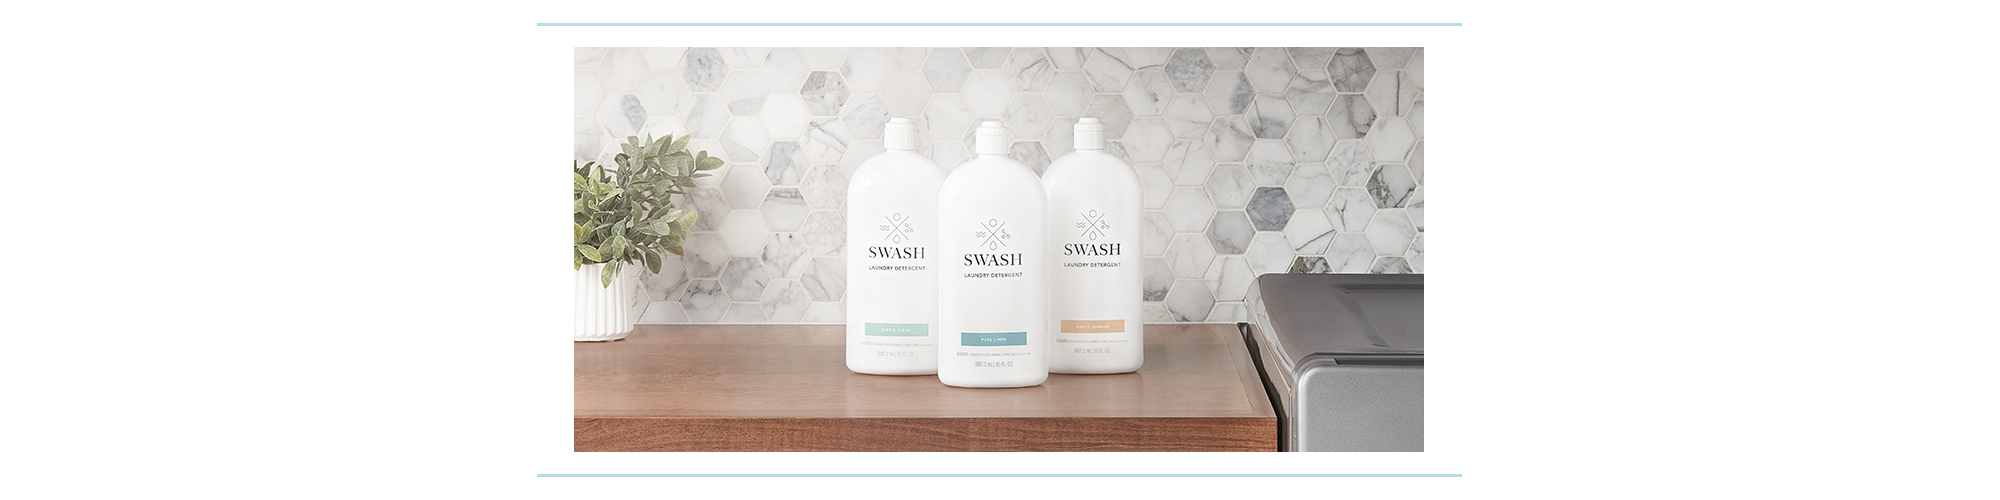 Three bottles of Swash lined up on a counter.